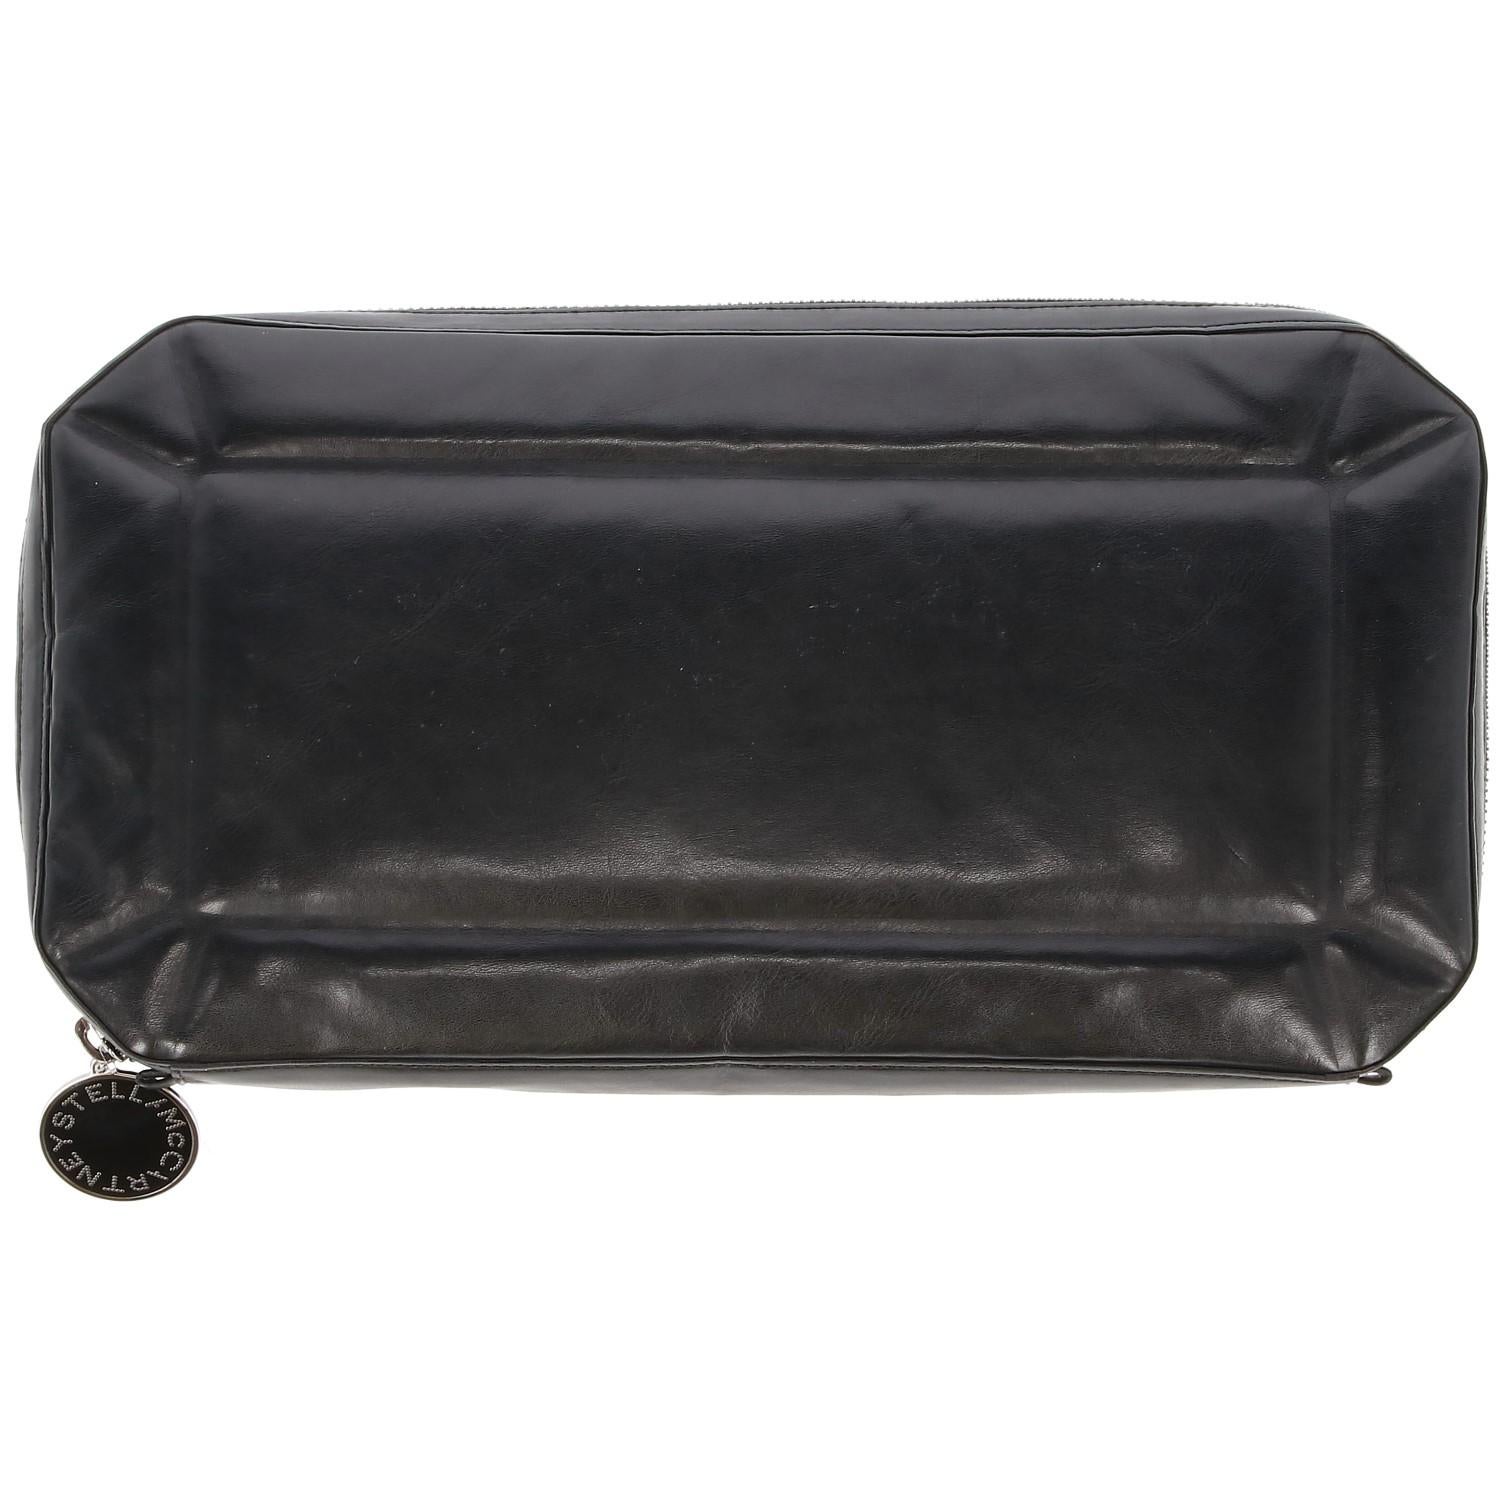 The stylish Stella McCartney black faux leather geometrical shape clutch is lightly matelassé, with elegant purple lining and zip- fastening with black and silver-tone round branded pendent. The bag shows some stains at lining, as shown in the